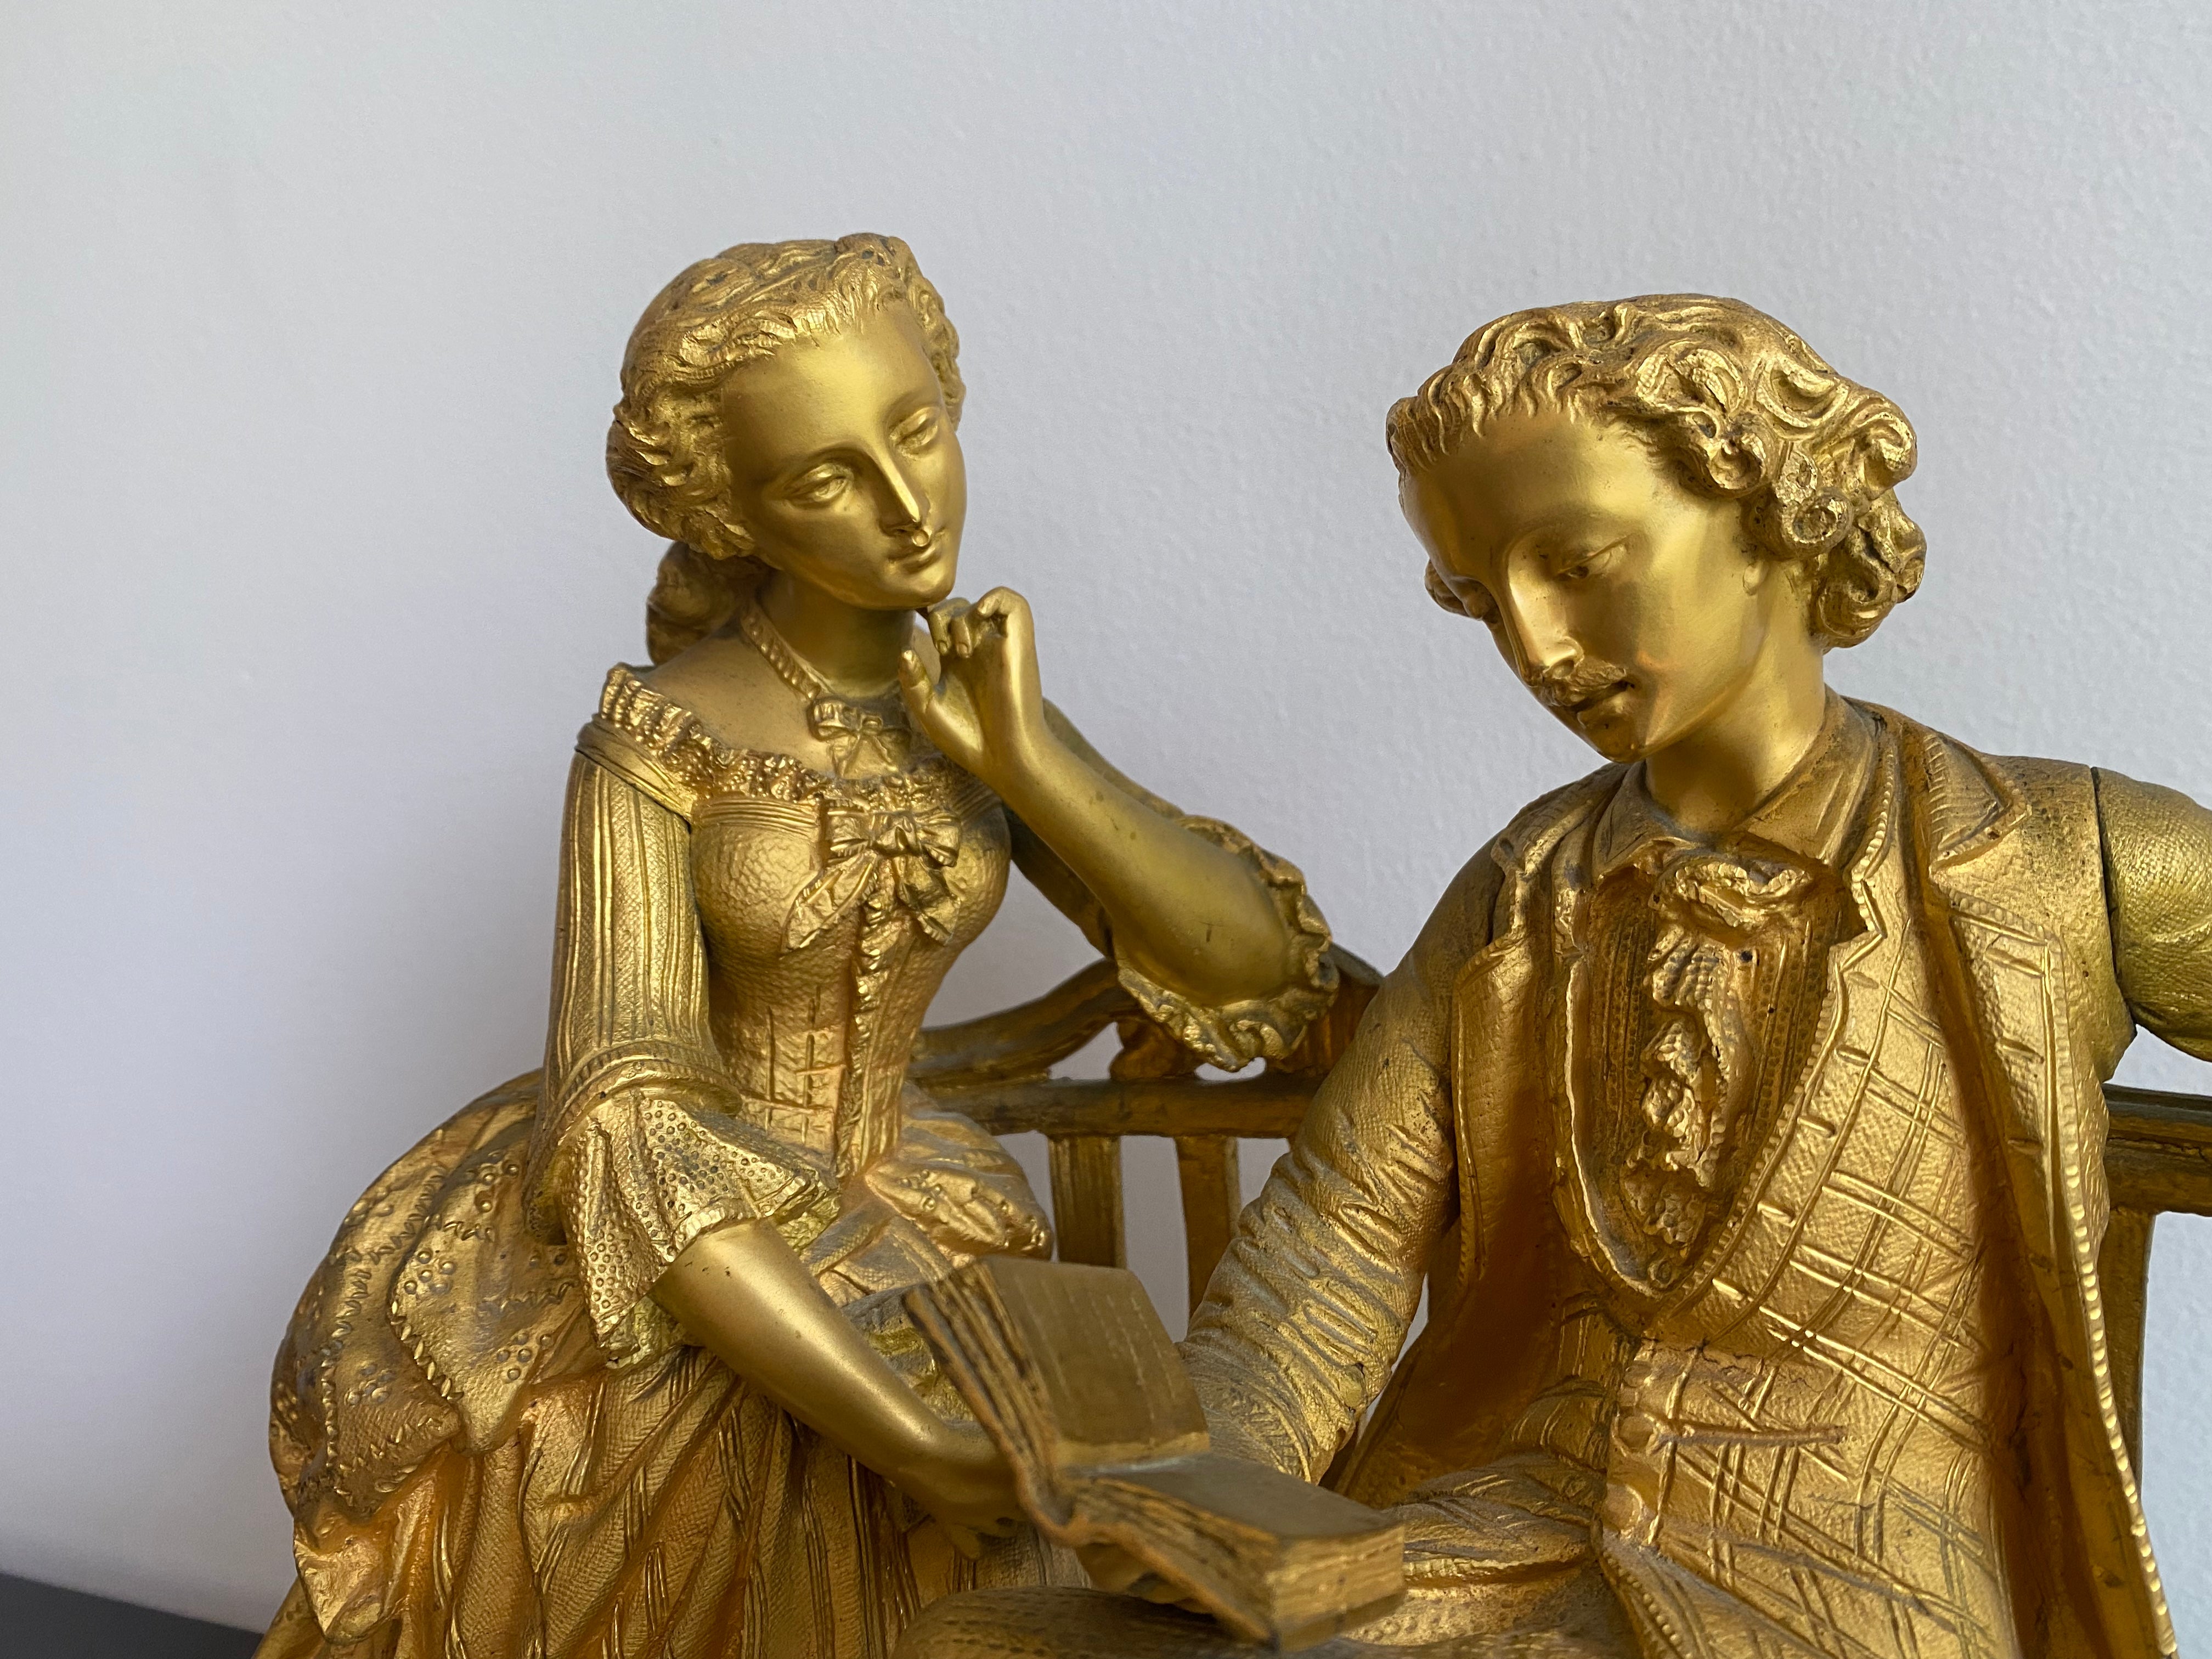 1890s French sculpture, gilt metal couple figure with marbel base